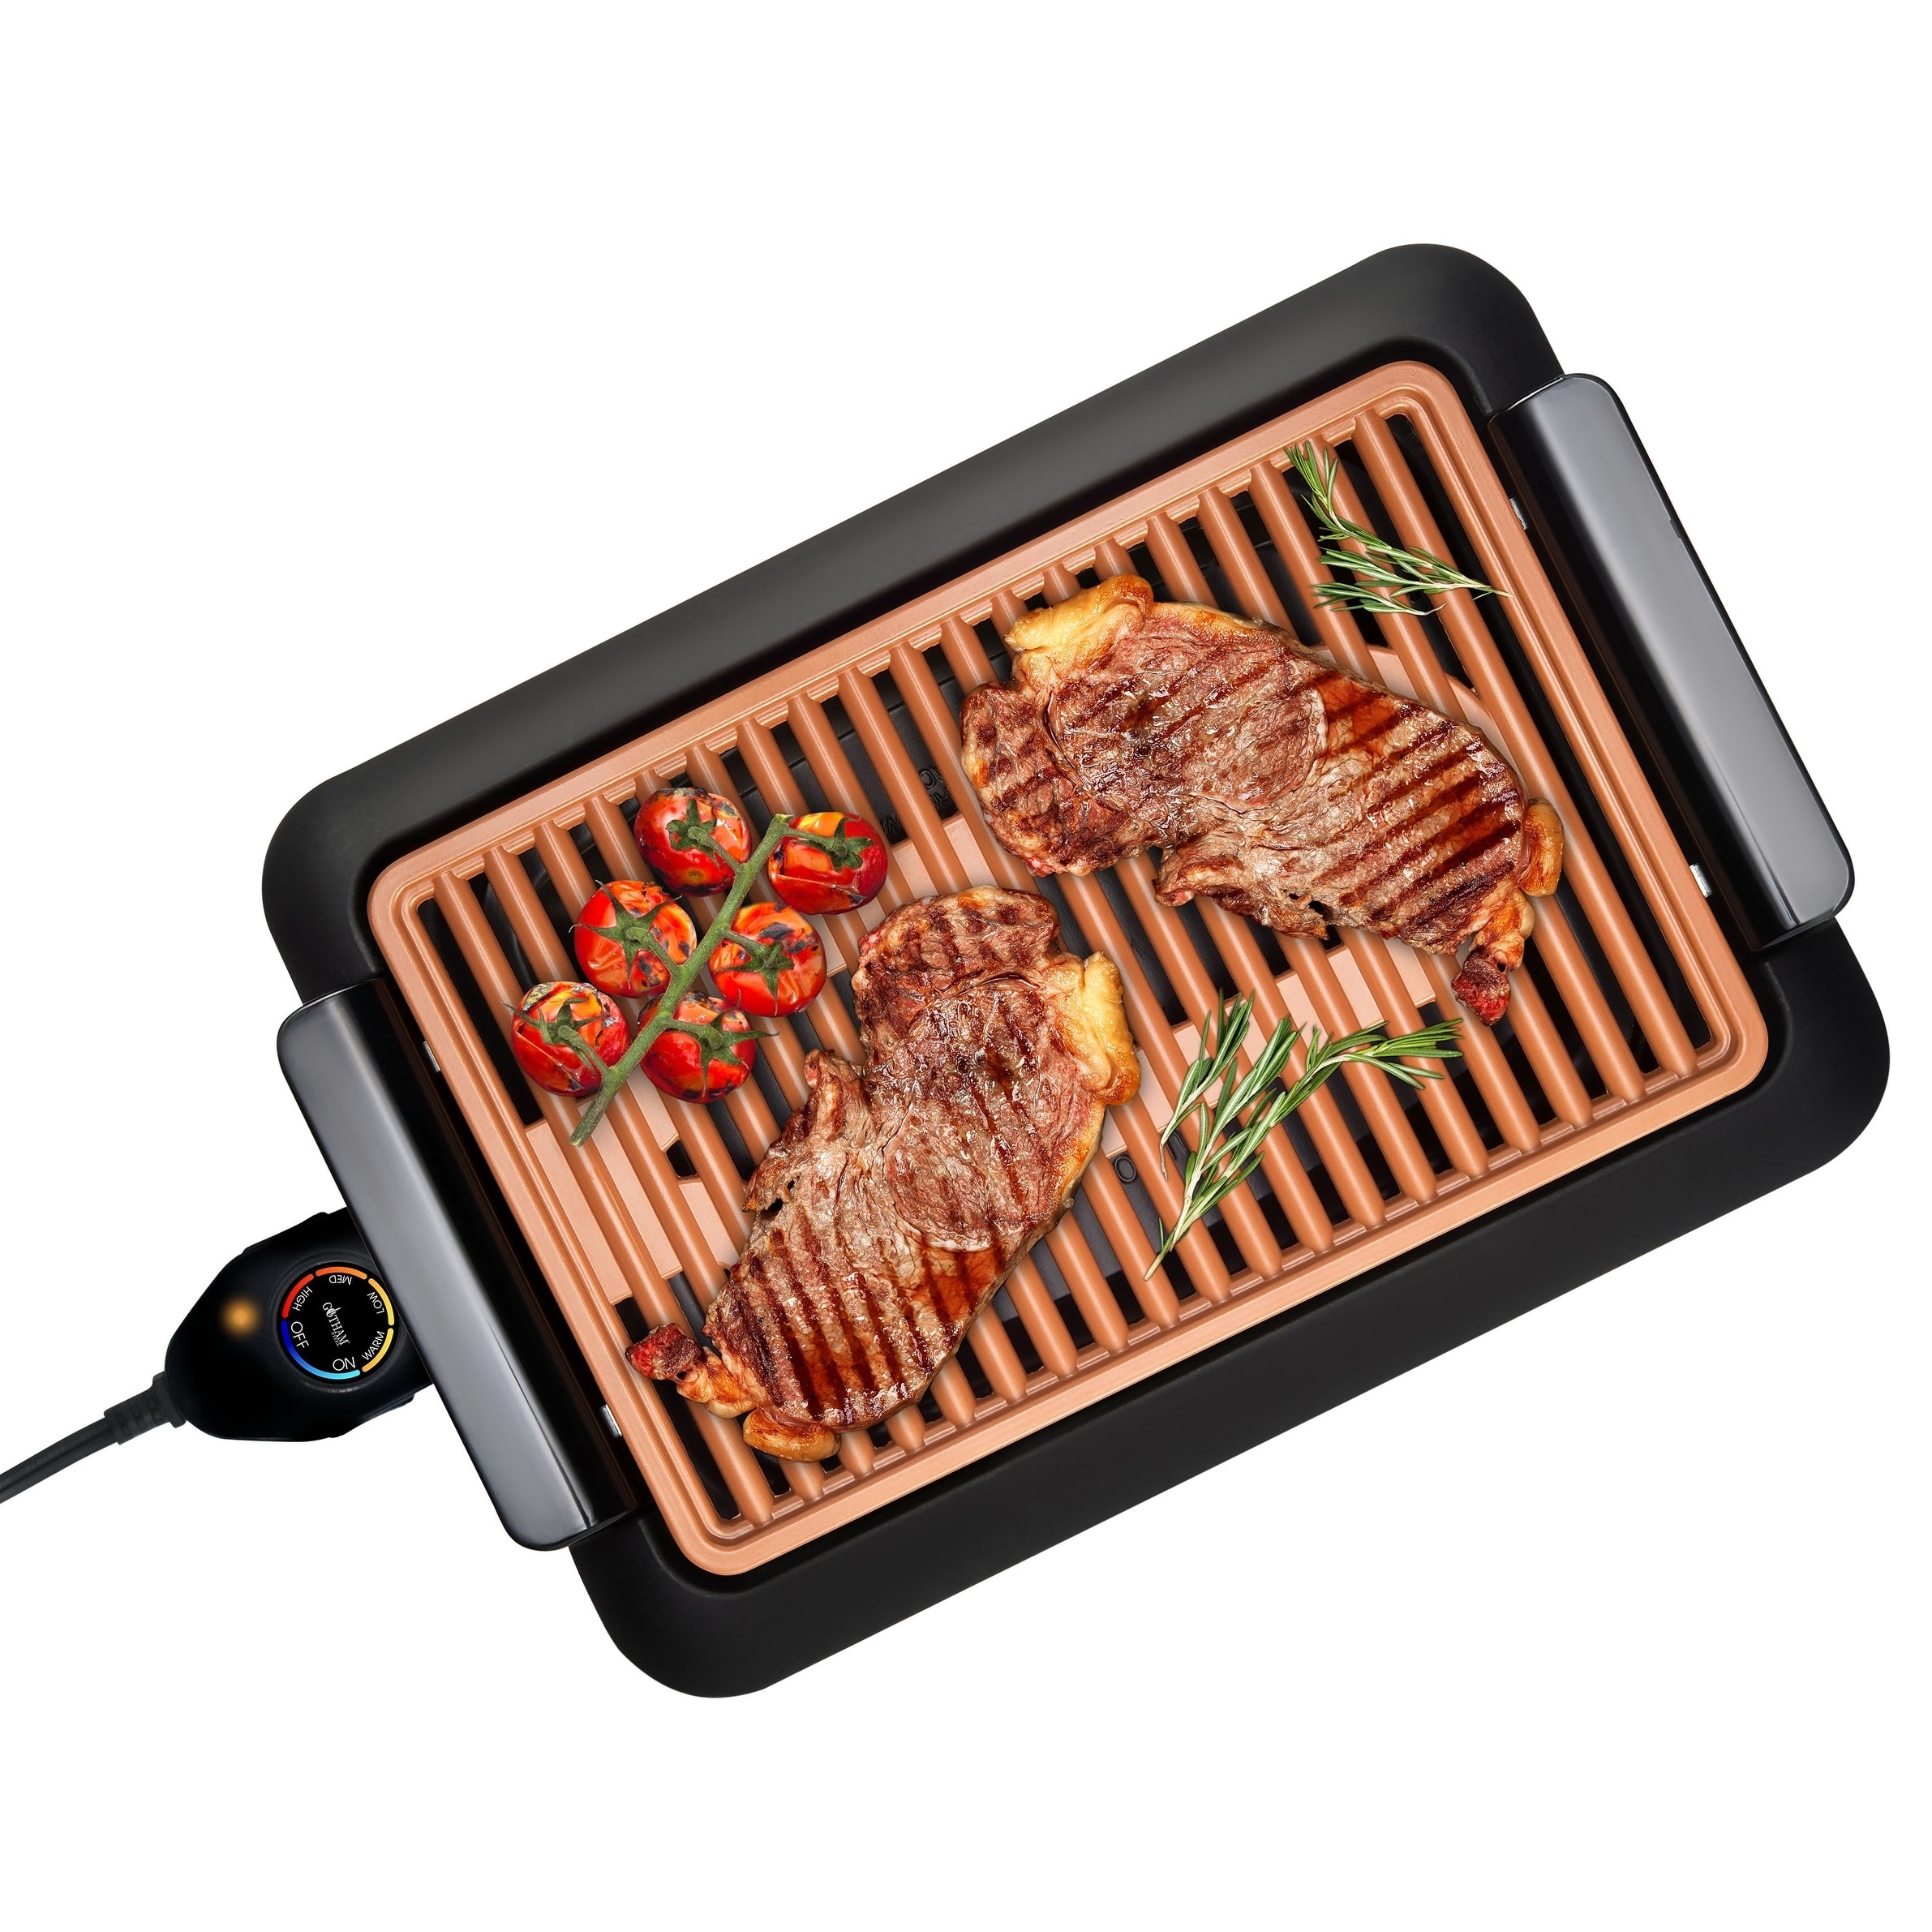 https://ak1.ostkcdn.com/images/products/20634744/Gotham-Steel-Large-18x13-Copper-Non-stick-Smokeless-Indoor-Grill-As-Seen-On-TV-66c7da7f-704a-443d-834a-25536d8a69dd.jpg